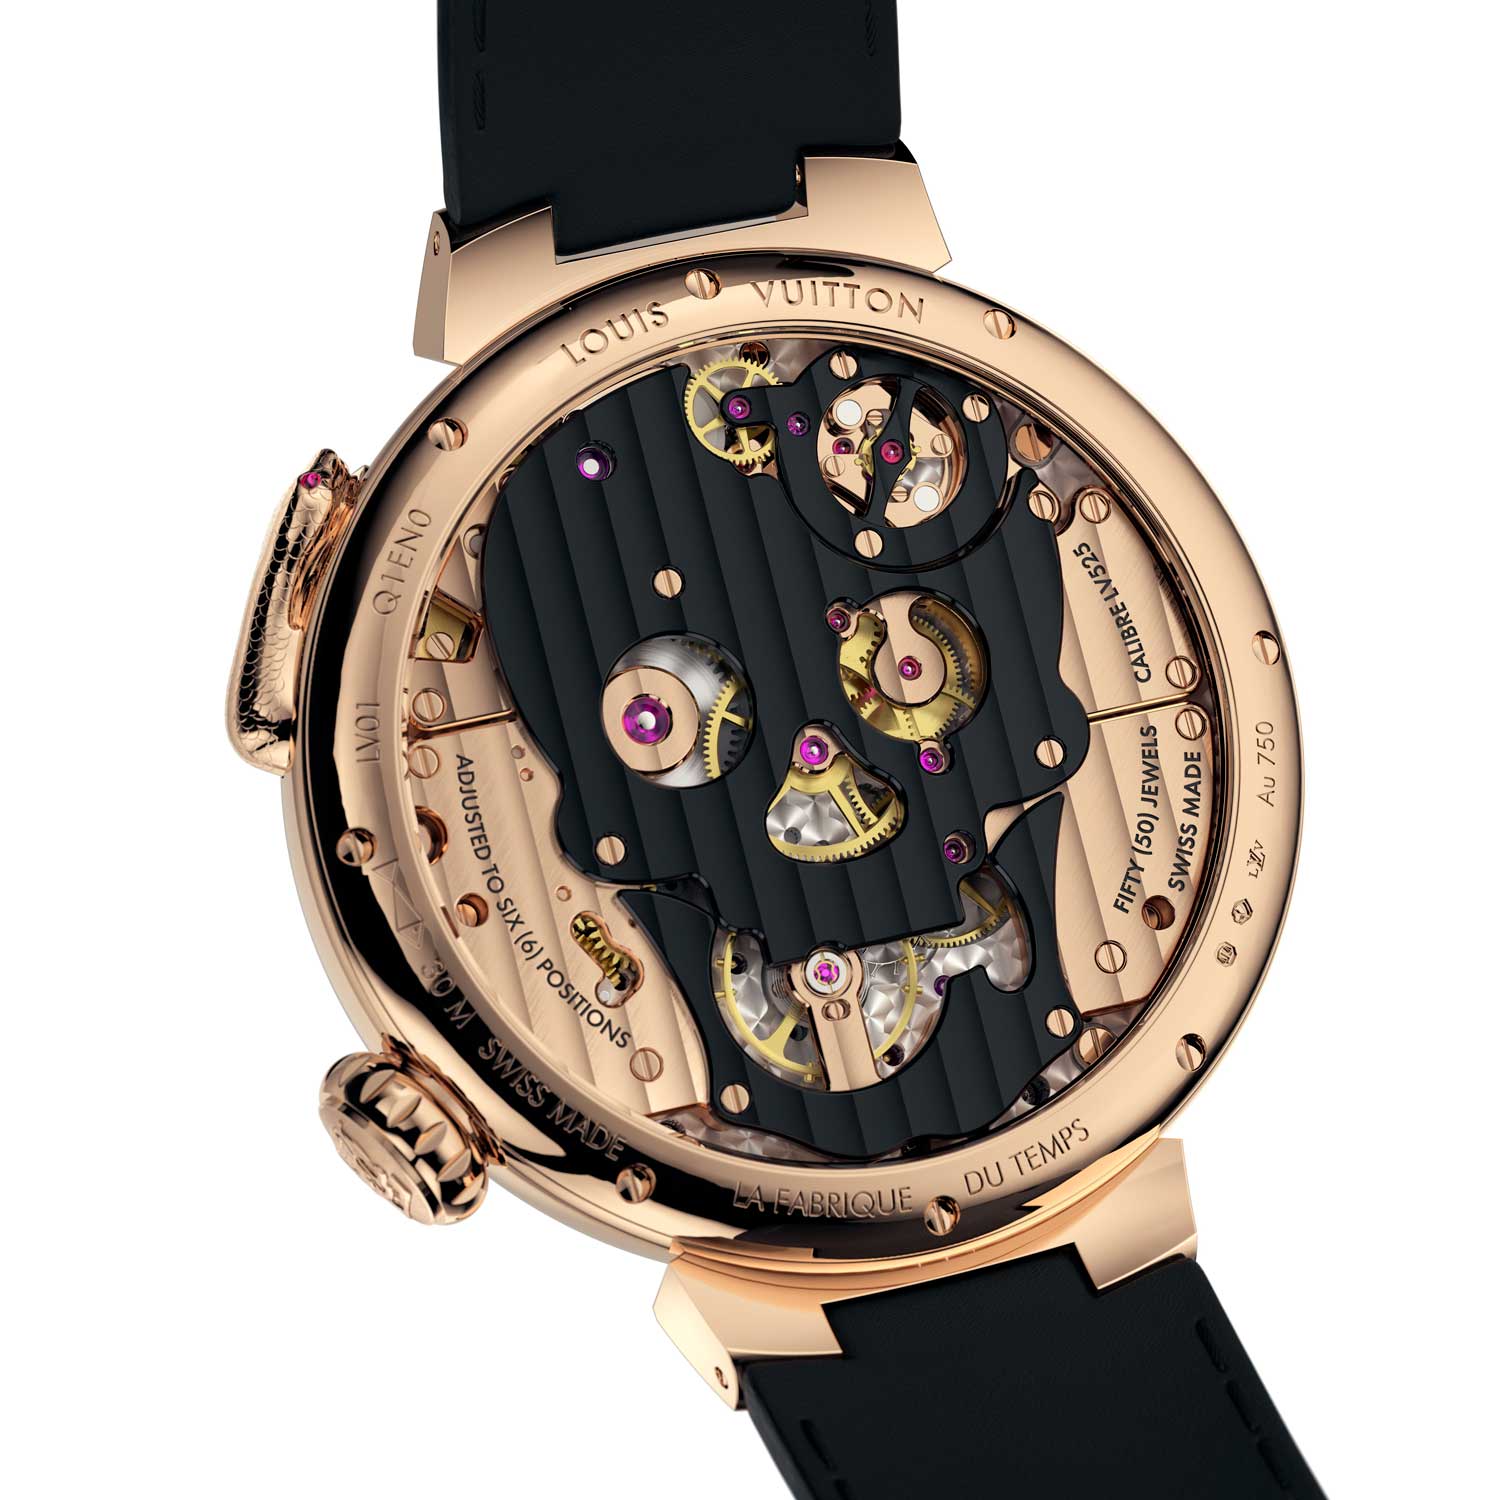 The watch is powered by LV 525 Caliber that supplies 100 hours of power reserve.